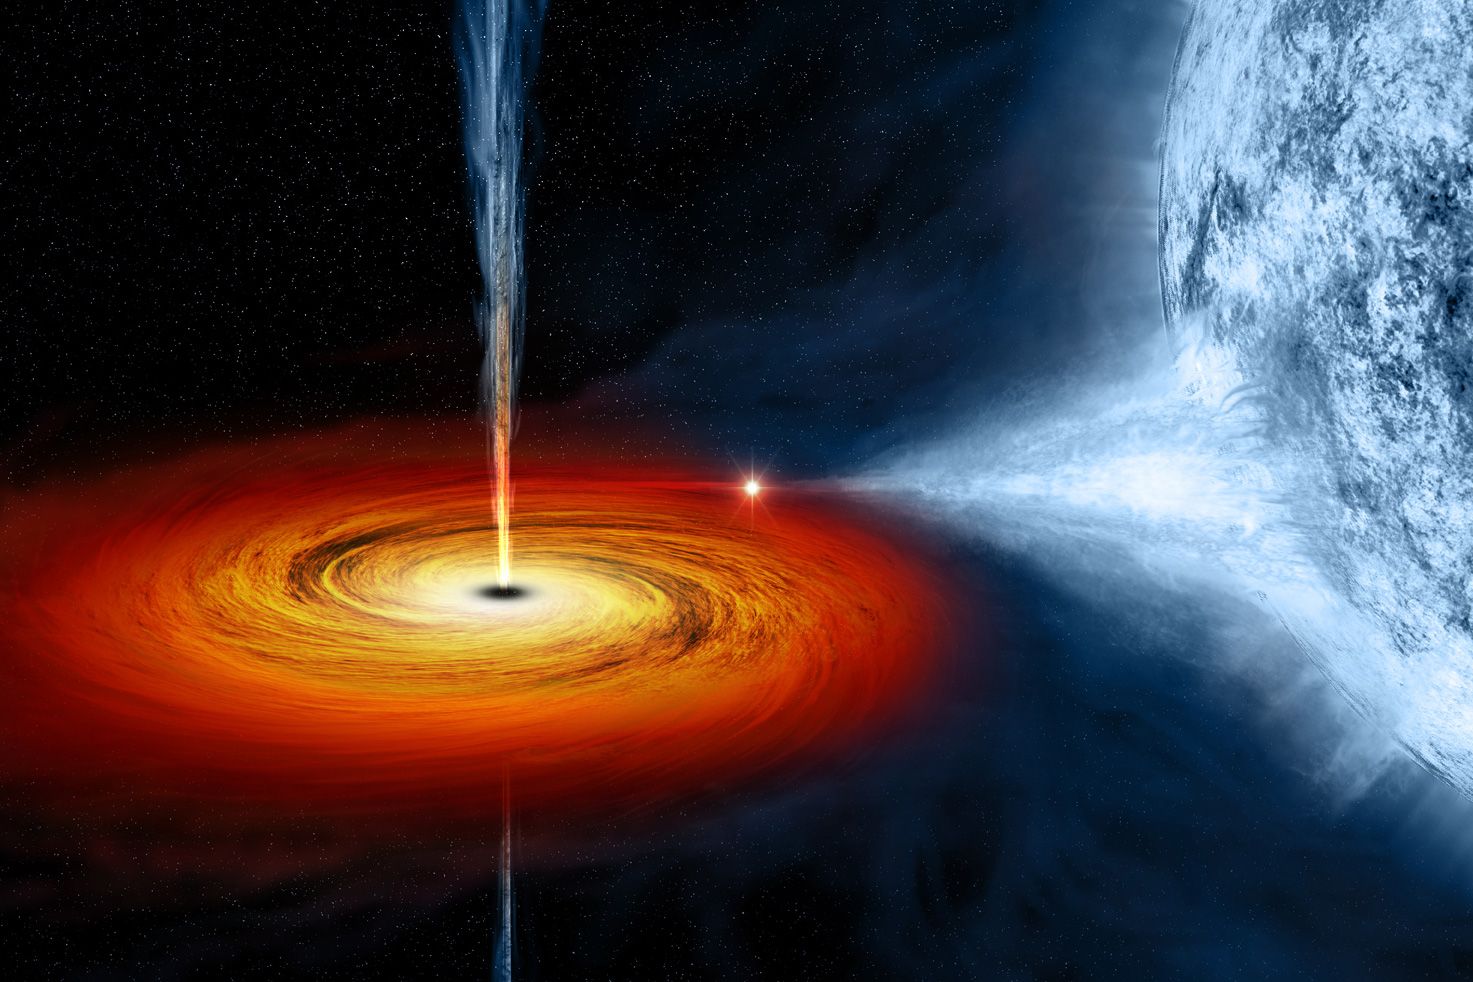 A Method To Image Black Holes Mit News Massachusetts Institute Of Technology